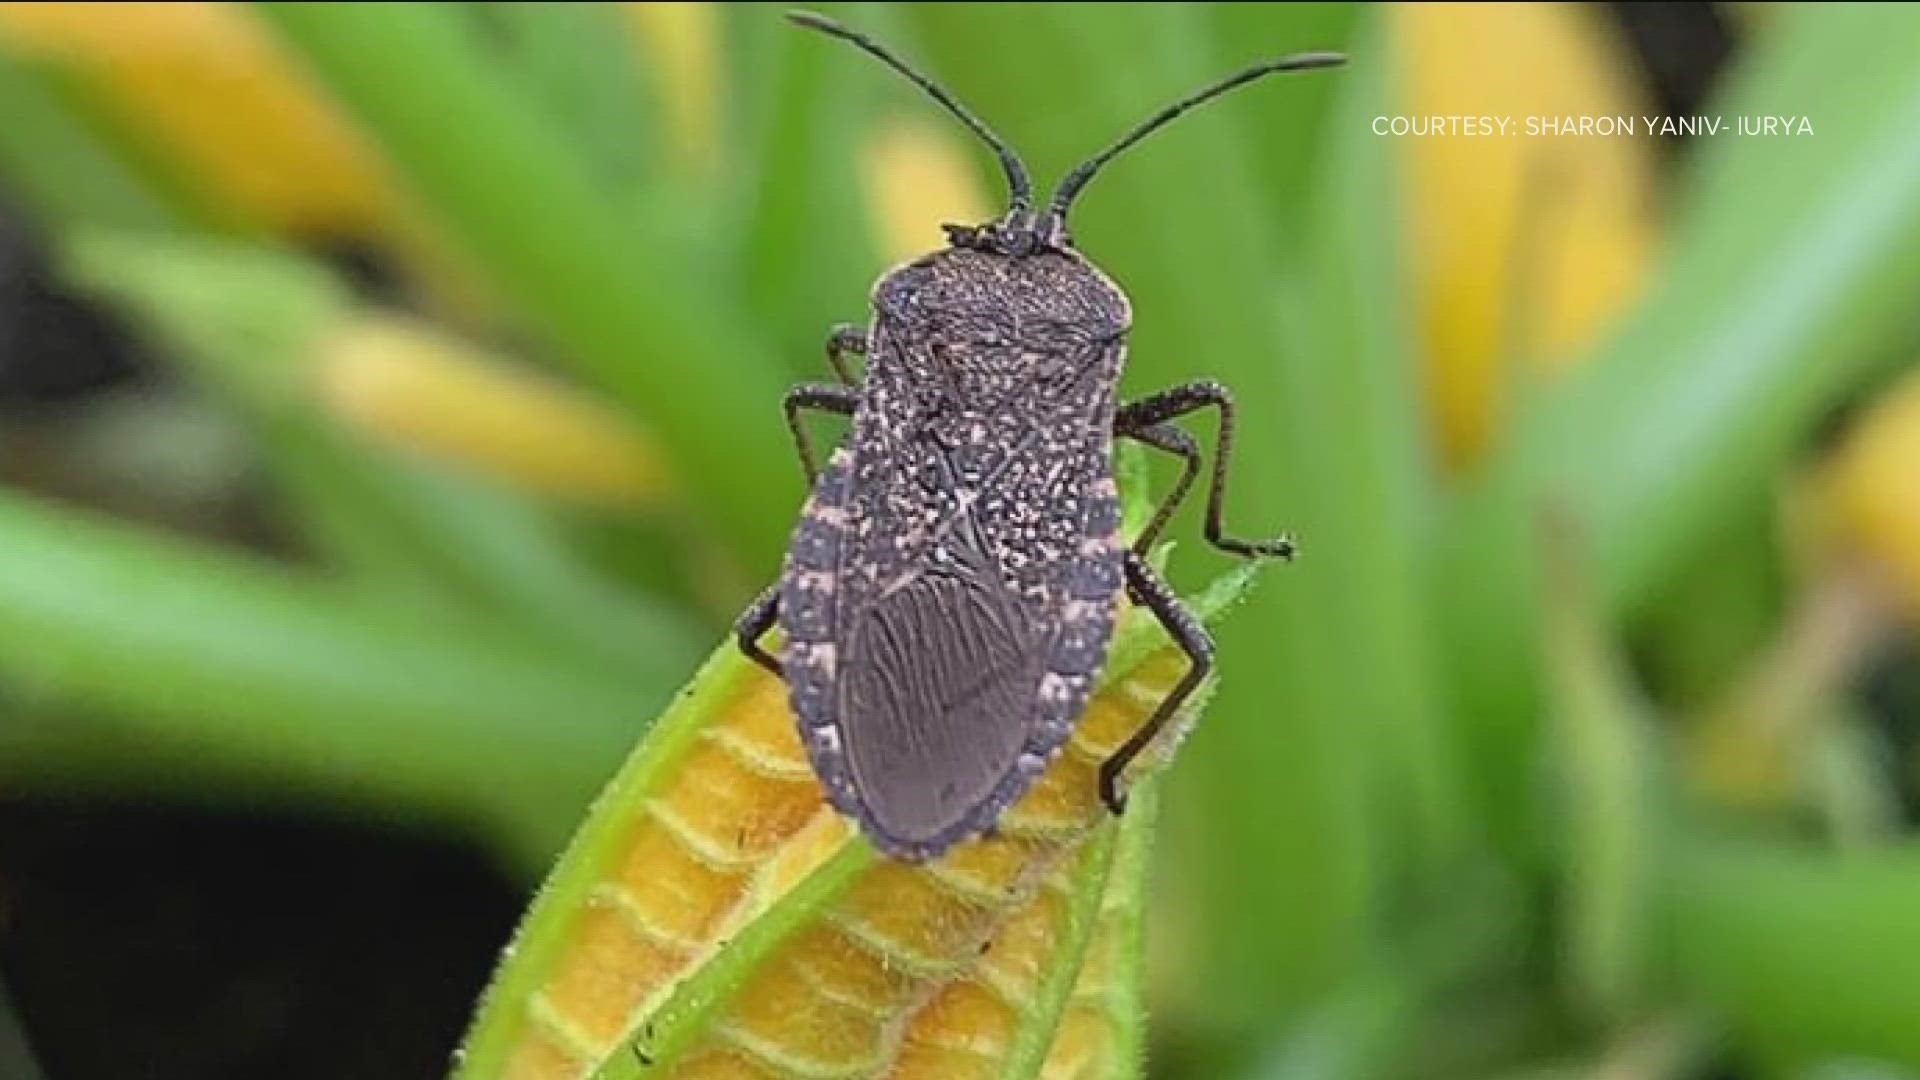 KTVB's Garden Master Jim Duthie takes a look at Idaho three most-common garden pests and provides steps for getting rid of them.